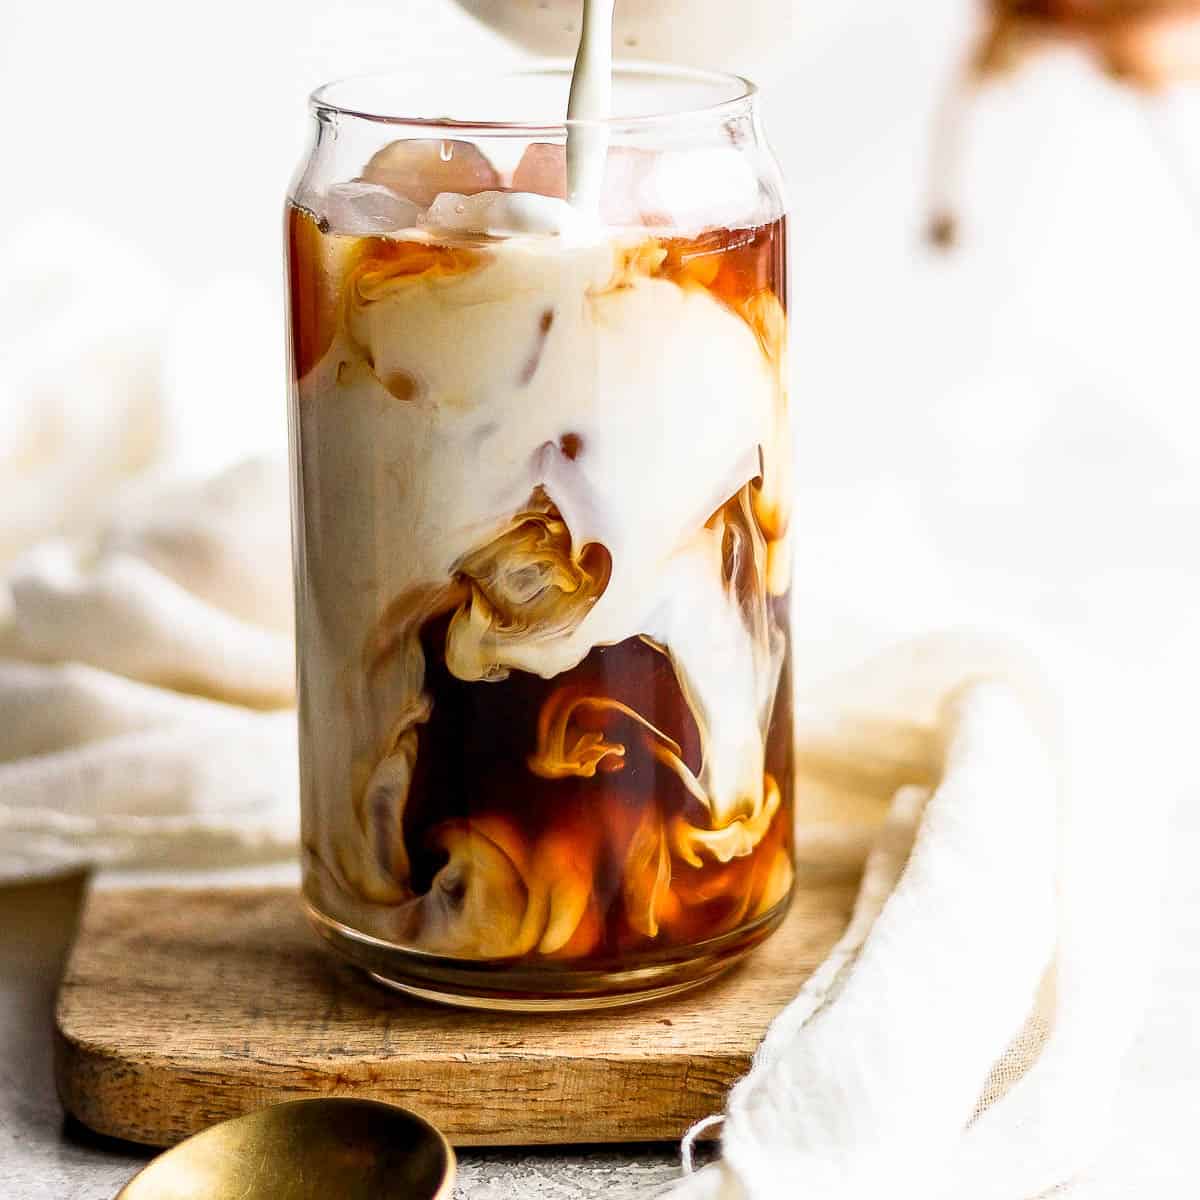 https://thewoodenskillet.com/wp-content/uploads/2023/03/iced-coffee-1.jpg